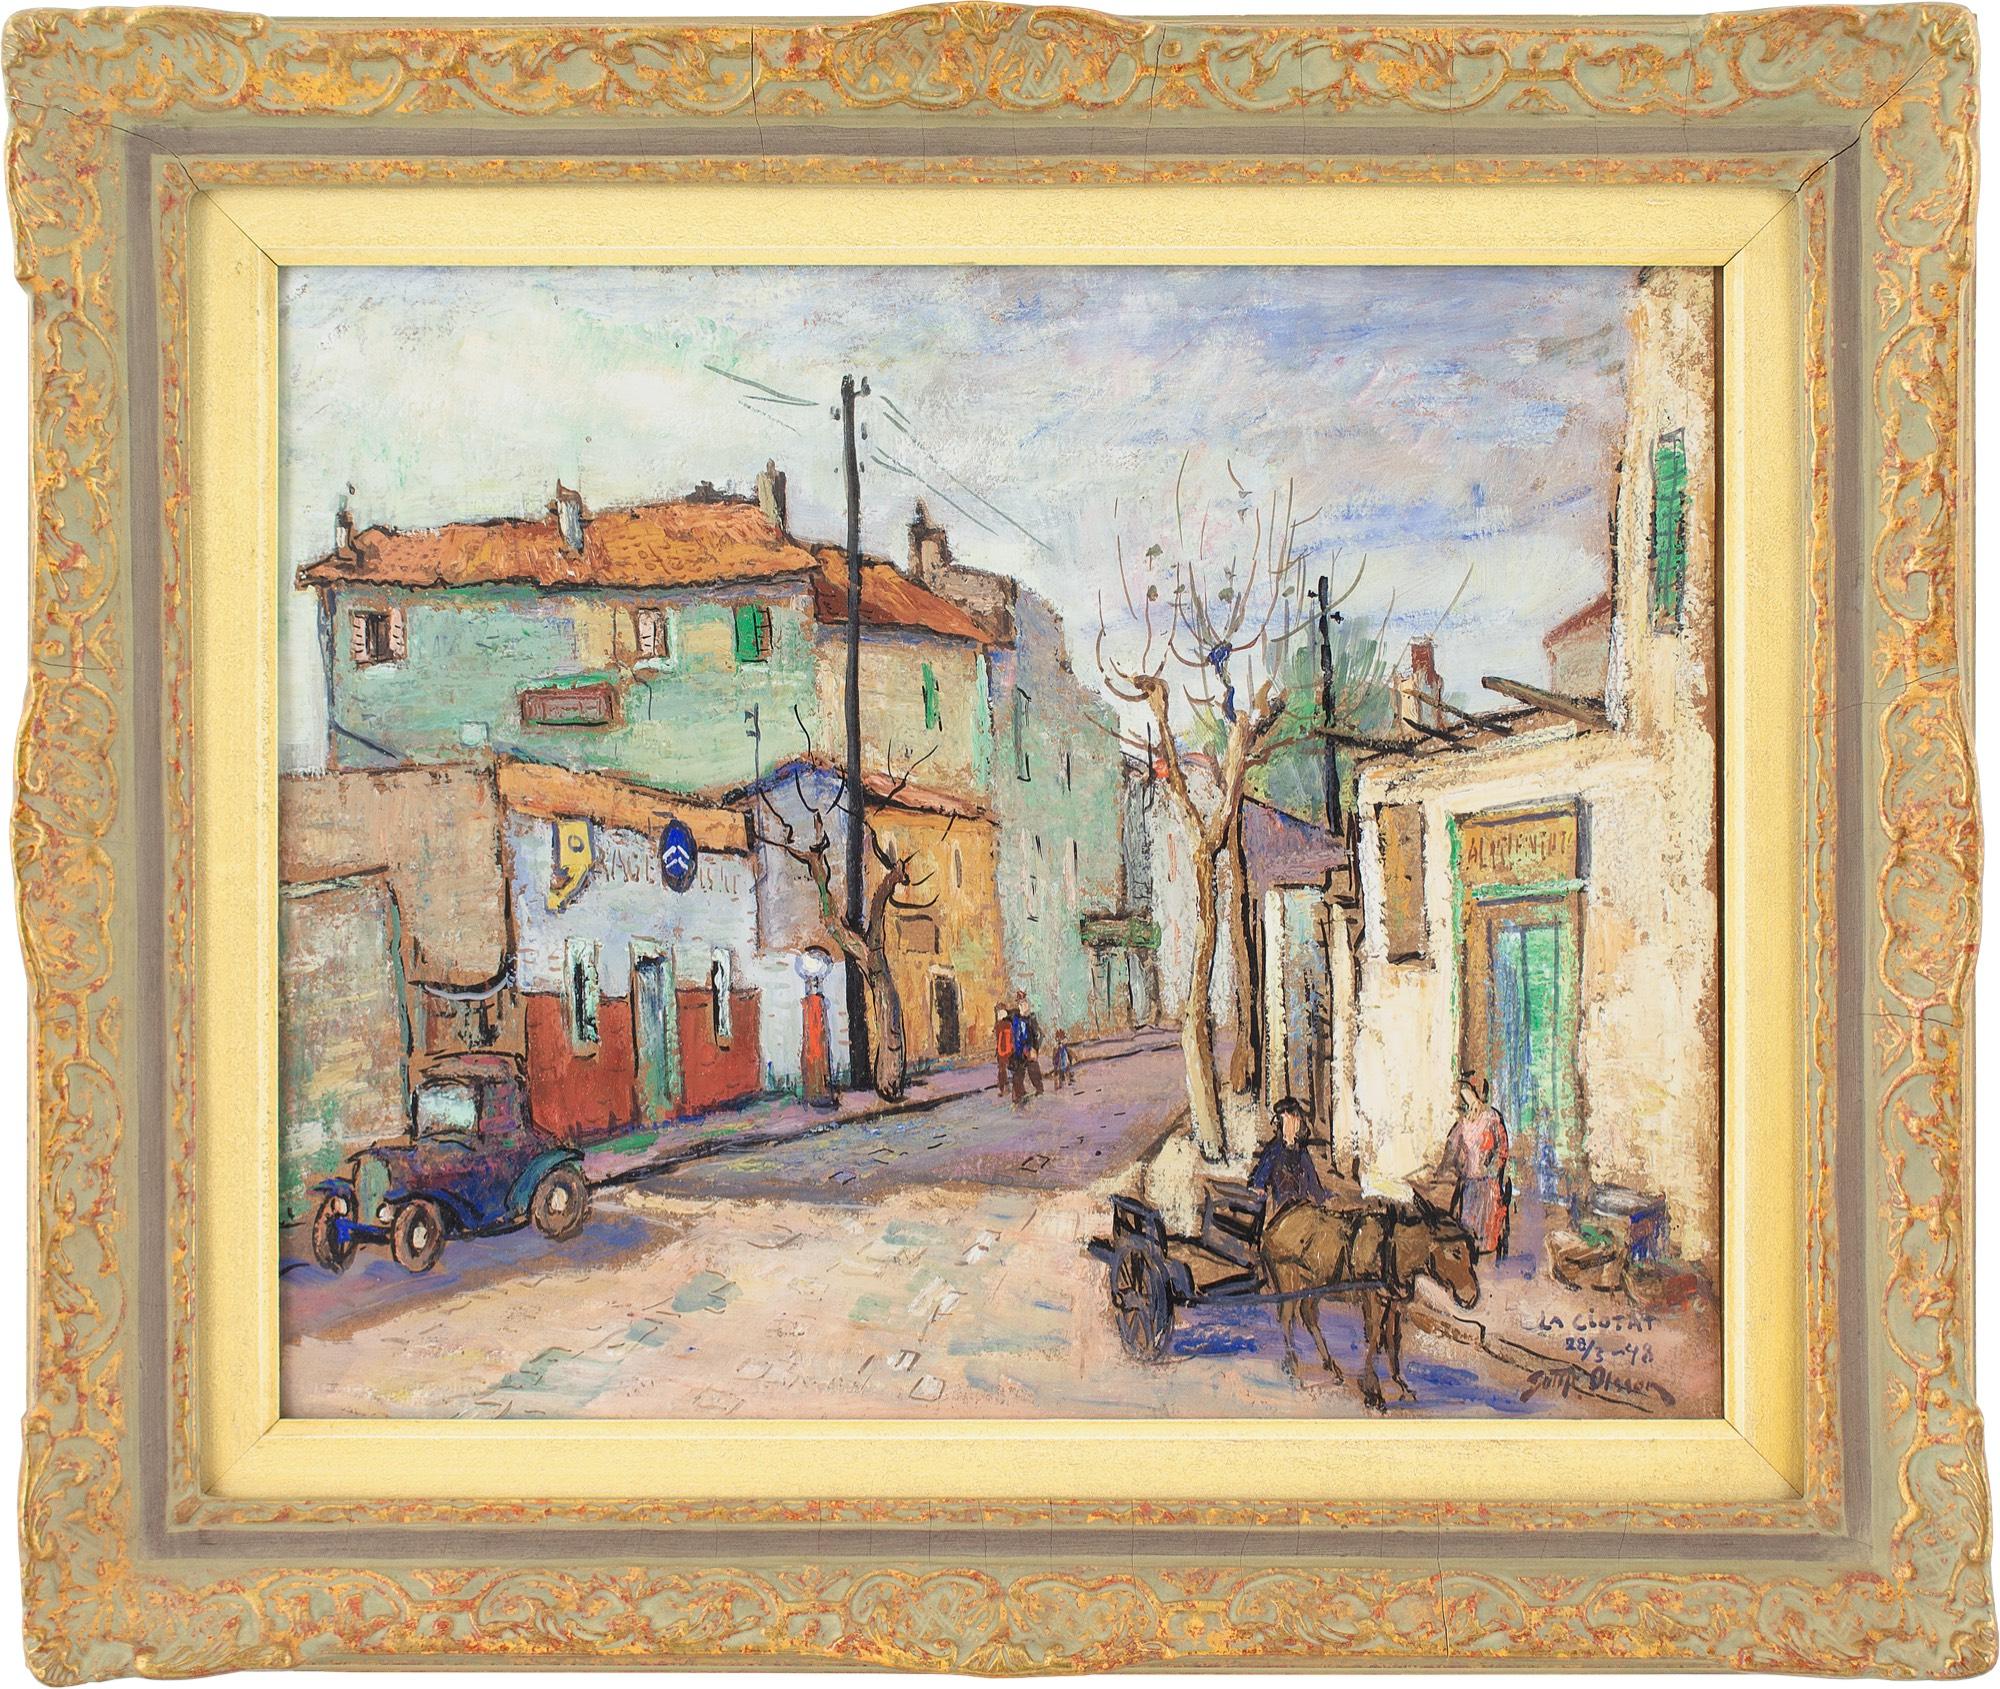 This charming mid-20th-century gouache by Swedish artist Gottfrid Olsson (1890-1979) depicts a colourful street in La Ciotat, France.

Situated in Provence, La Ciotat is a quaint 17th-century coastal town with a rich history. It’s close to Marseille